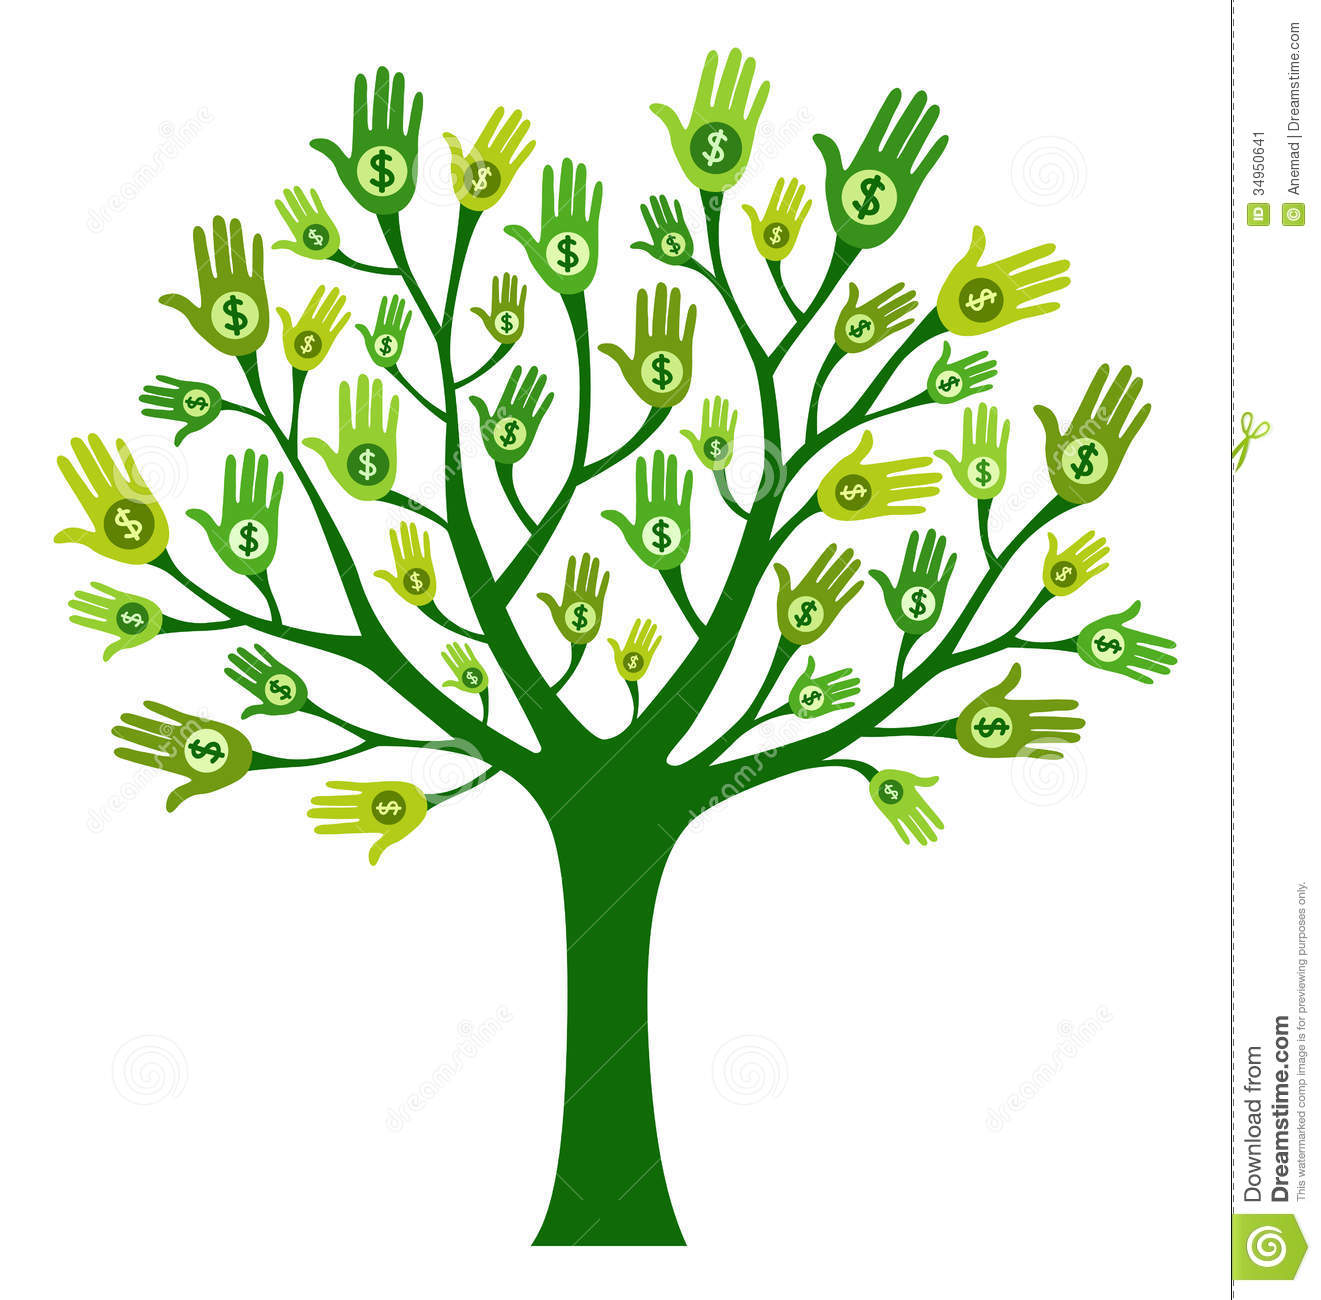 Watering Money Tree   Clipart Panda   Free Clipart Images